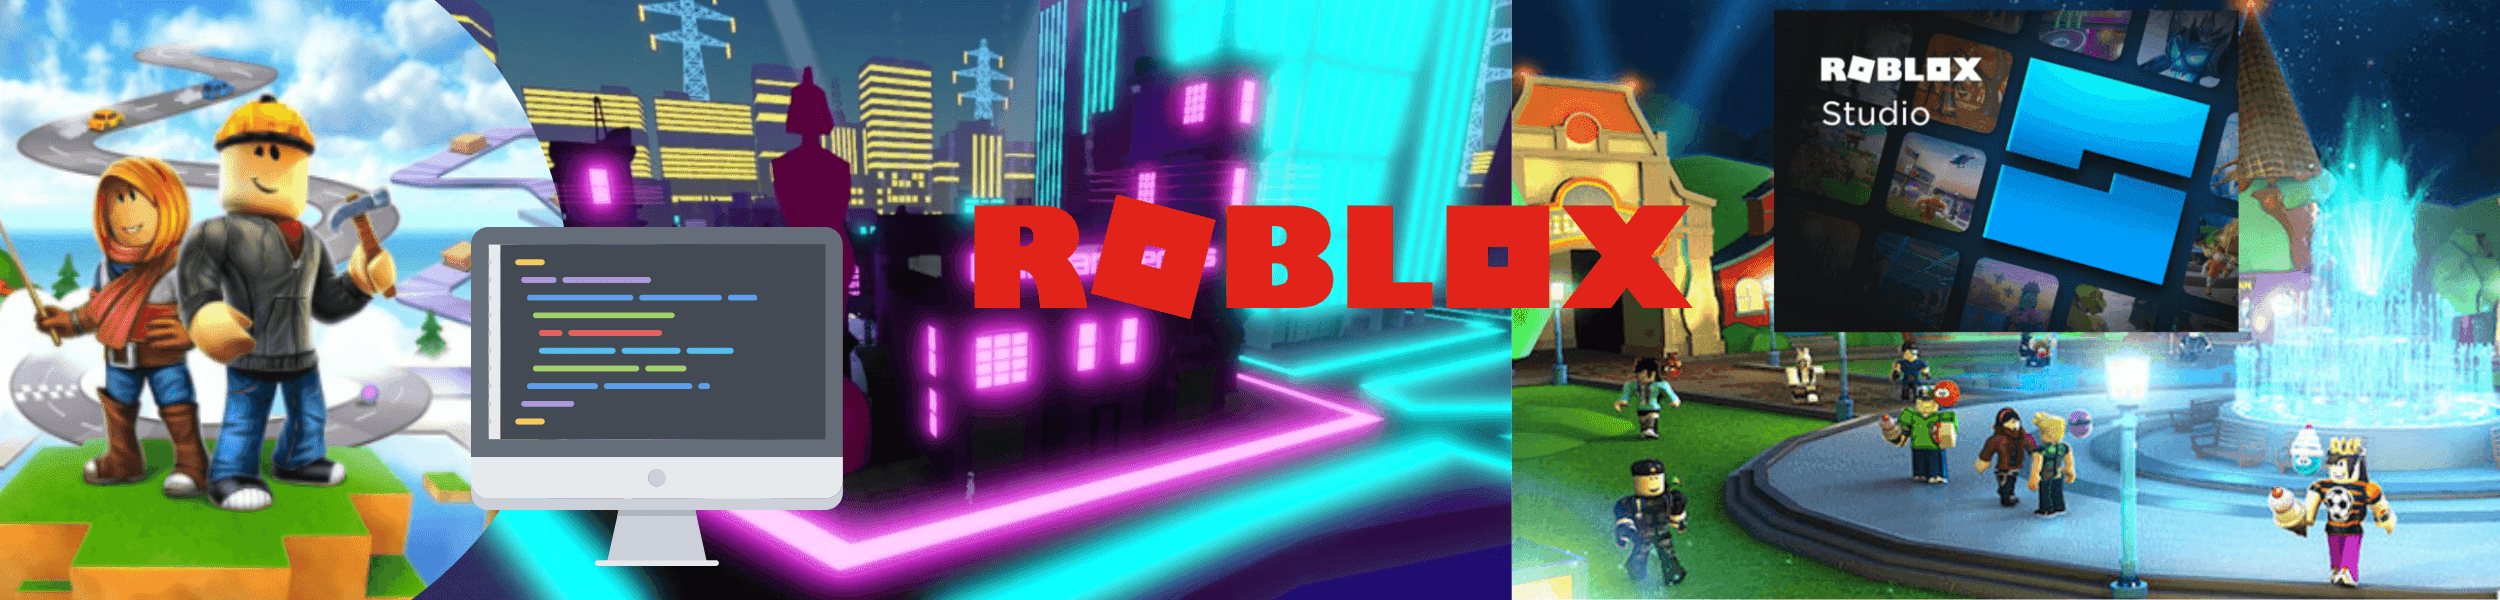 THE BEST FREE GAME IN ROBLOX 